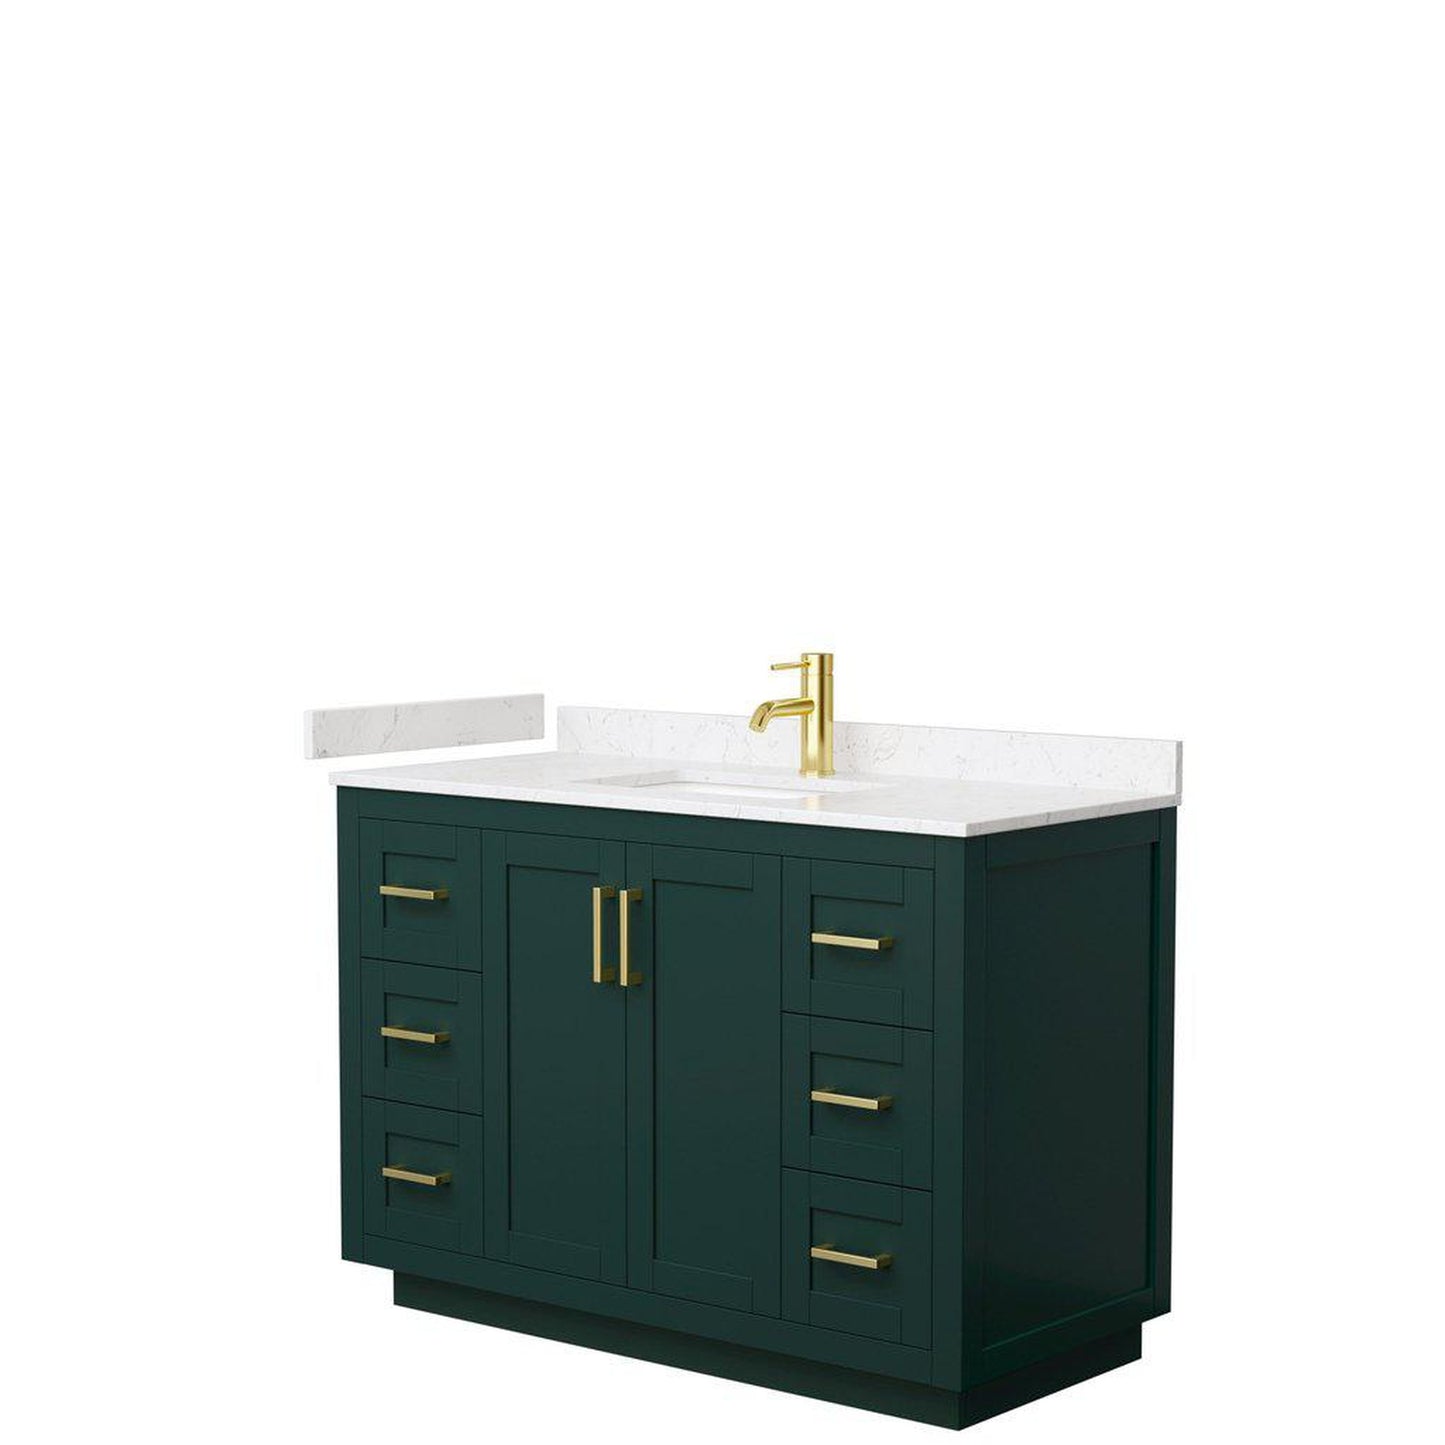 Wyndham Collection Miranda 48" Single Bathroom Green Vanity Set With Light-Vein Carrara Cultured Marble Countertop, Undermount Square Sink, And Brushed Gold Trim